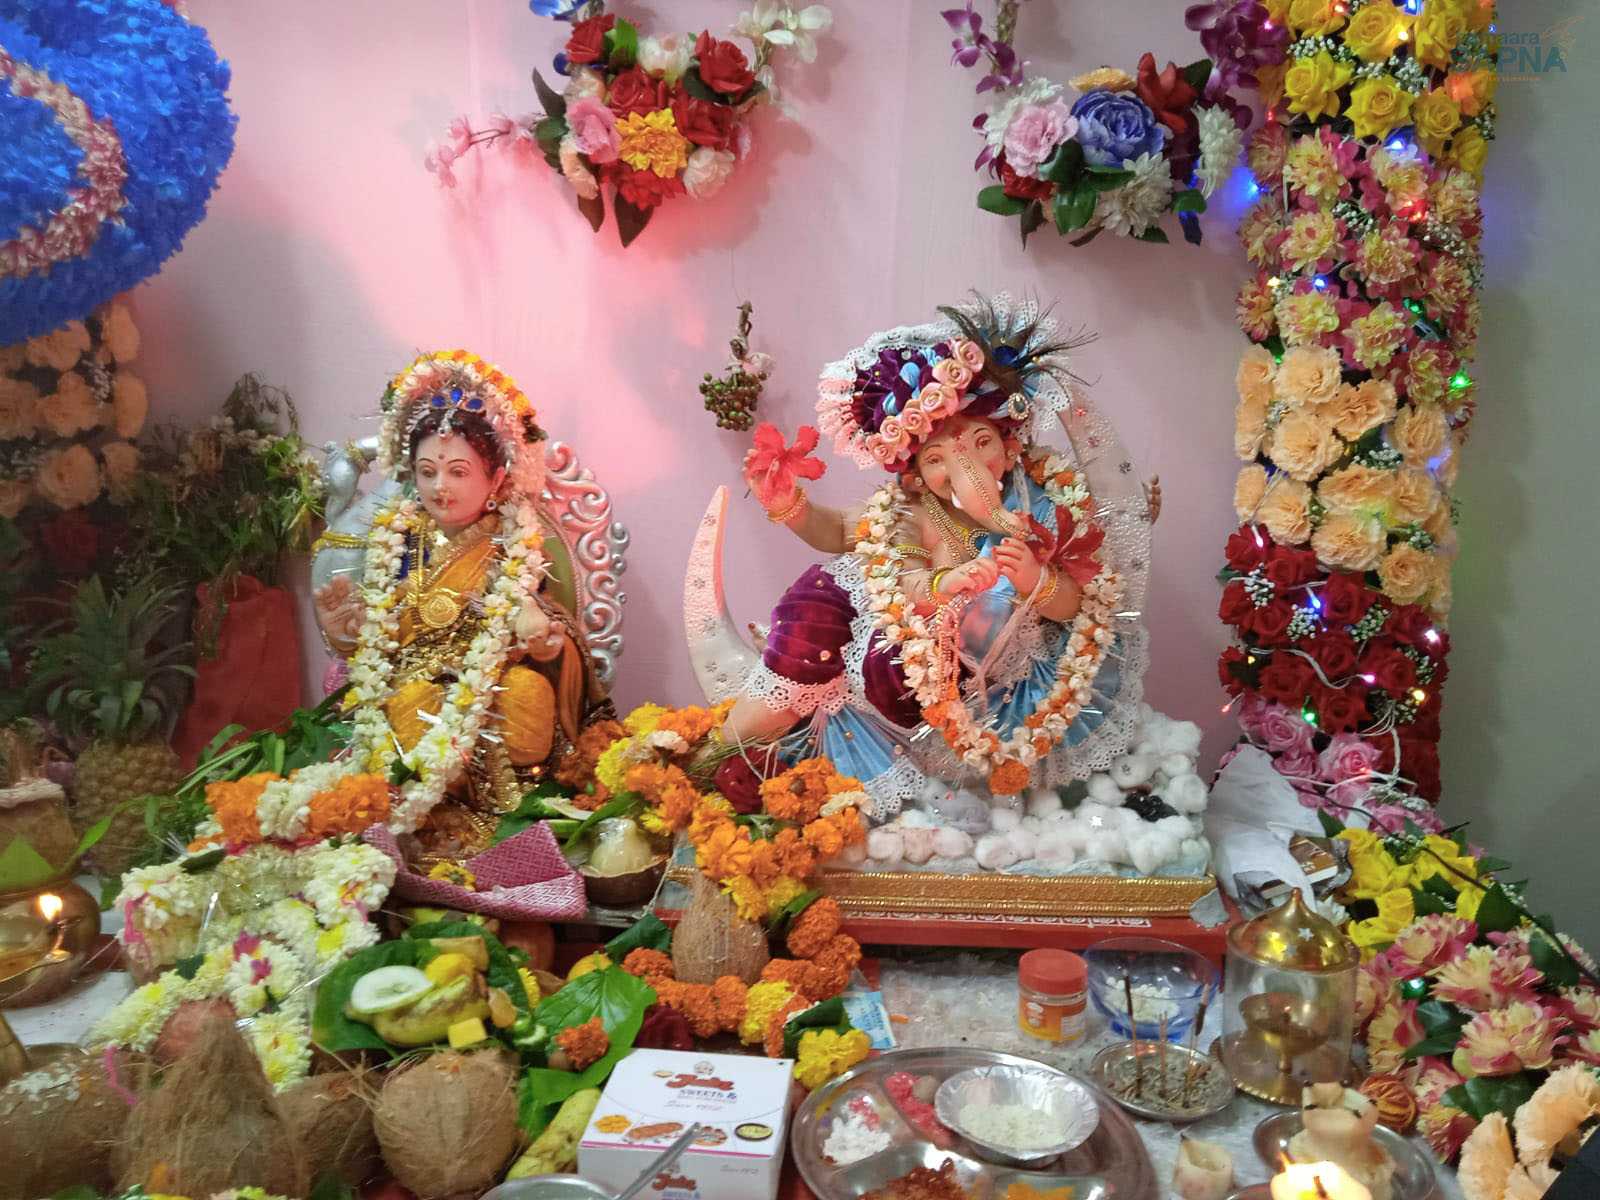 Colorful flower decorations and beautiful lights was a lovely pandal for Guari and Ganapati celebration in a beneficiary’s home